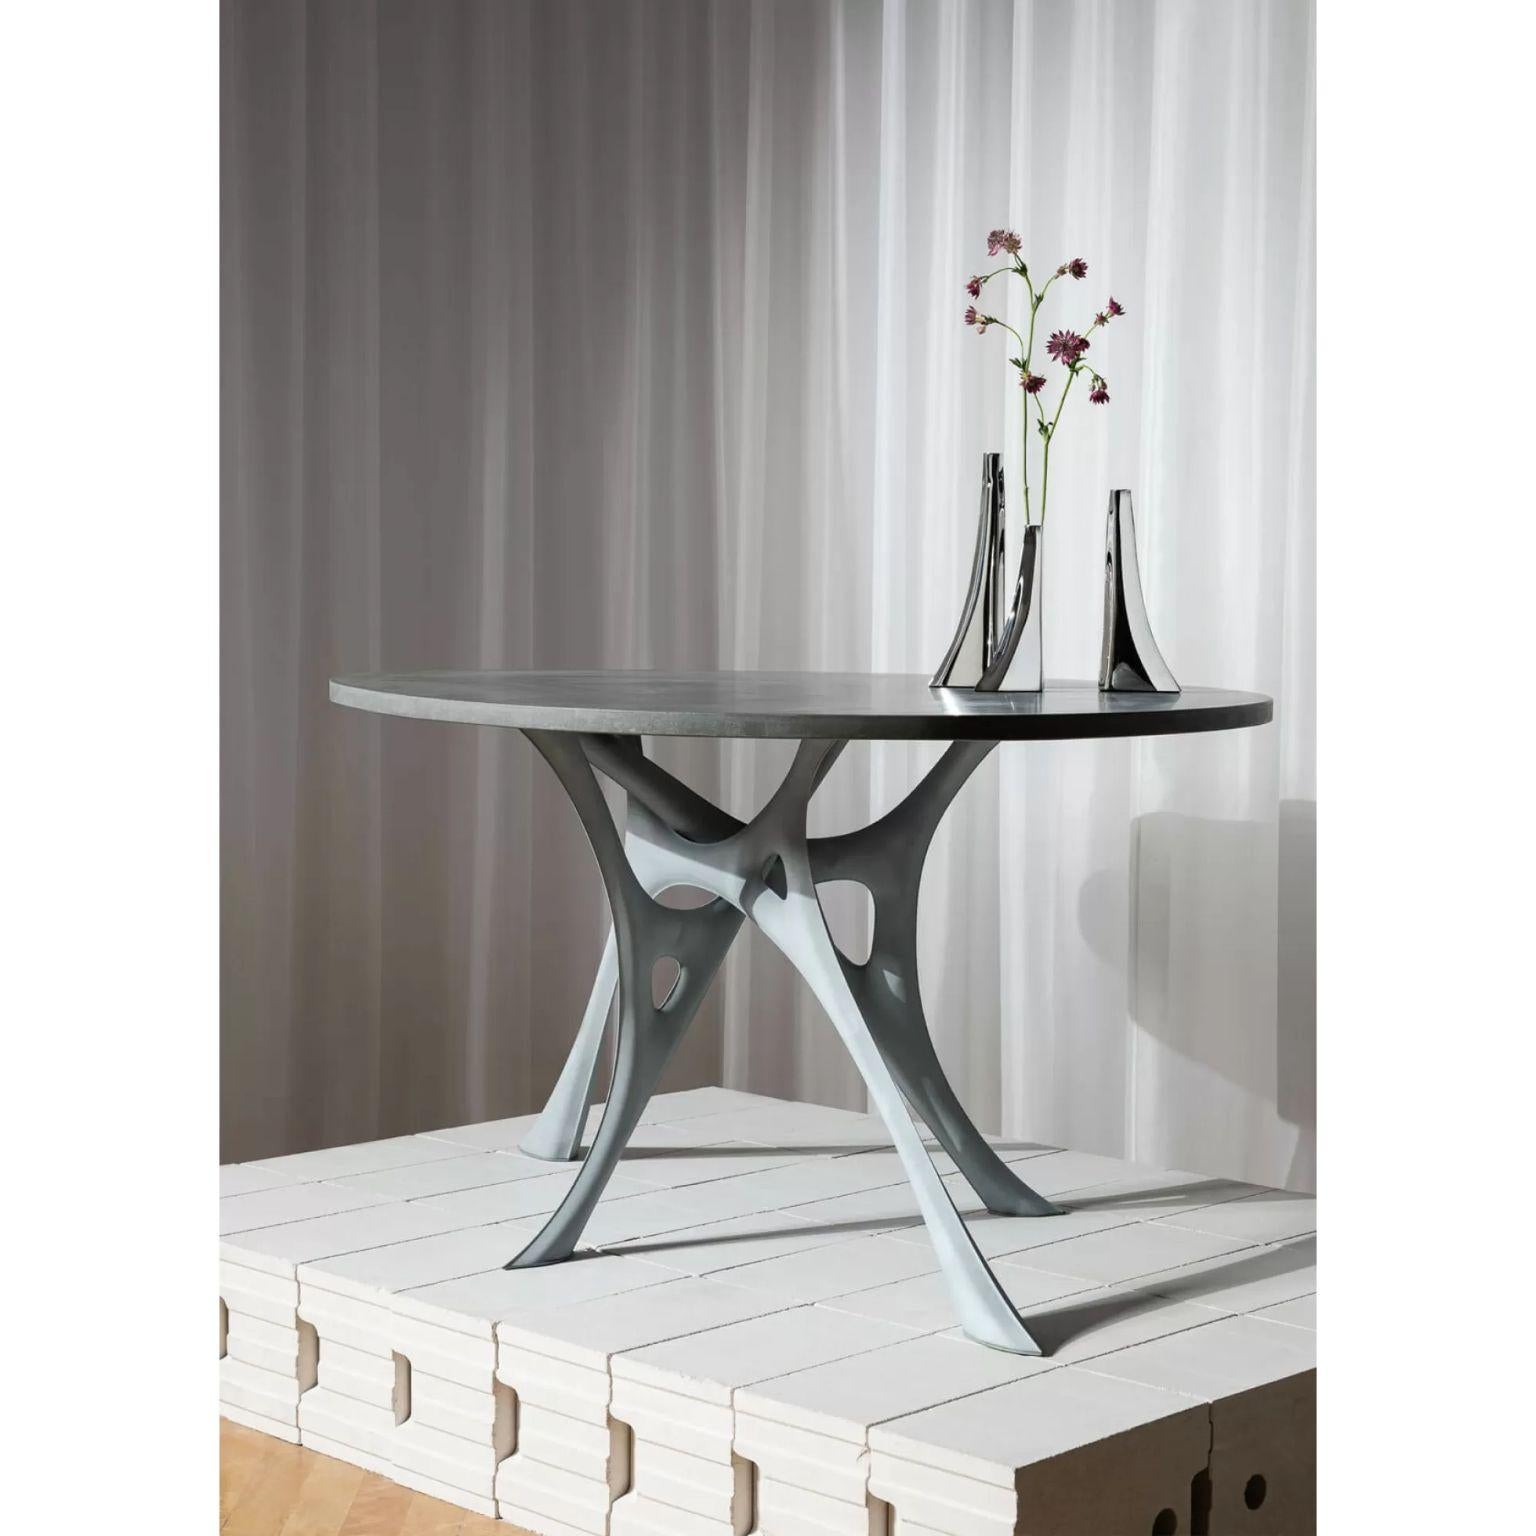 Post-Modern Morph, Thermometallized Steel and Concrete Table by Zieta For Sale